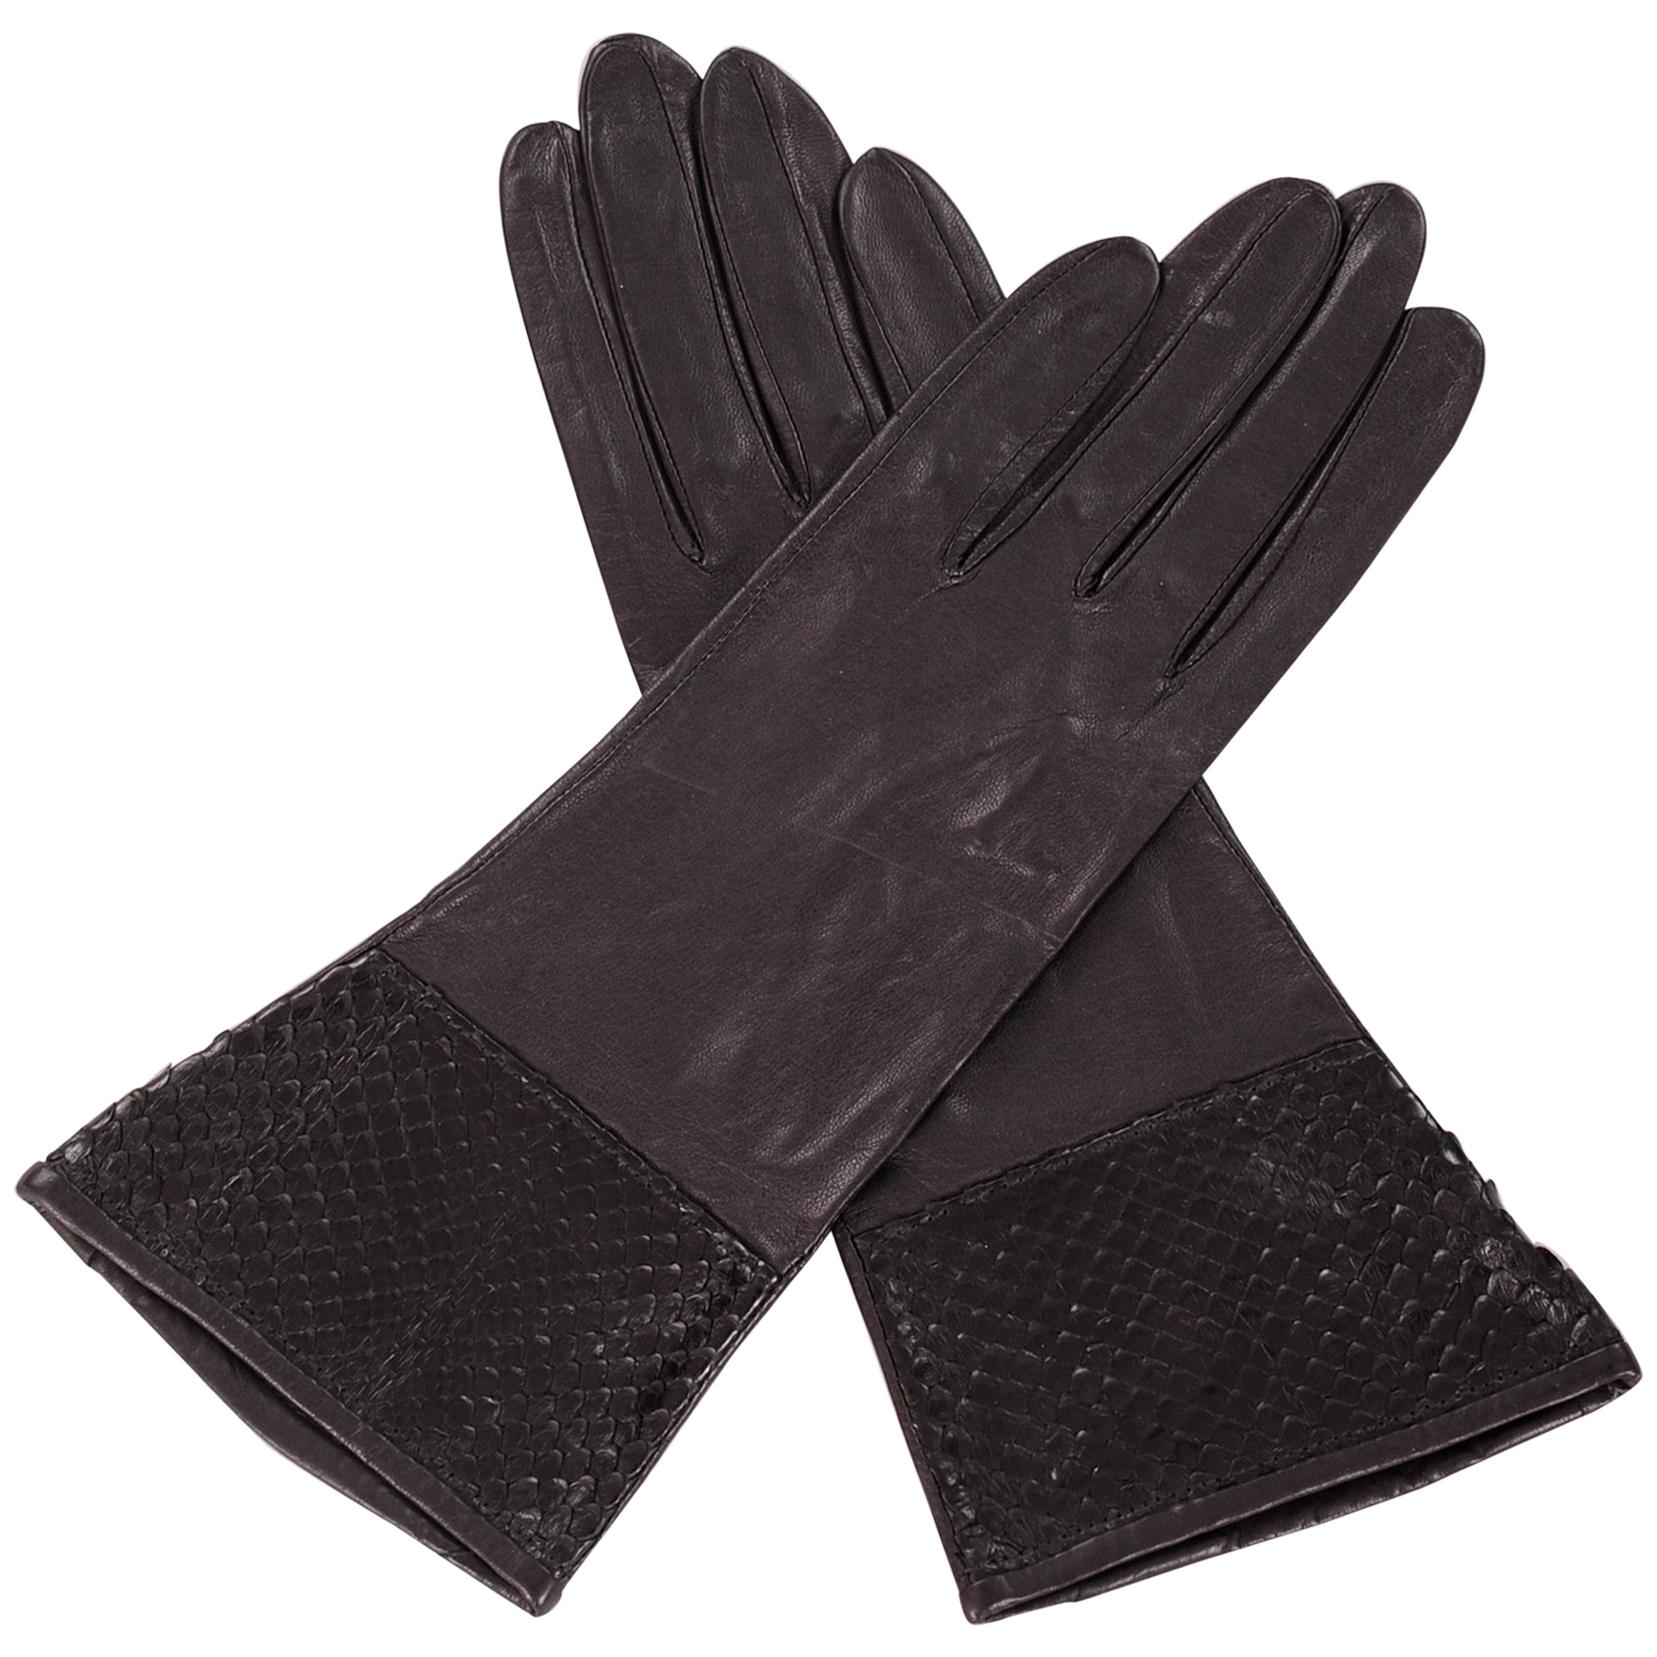 Carlos Falchi Black leather and Snakeskin Gloves Never Worn